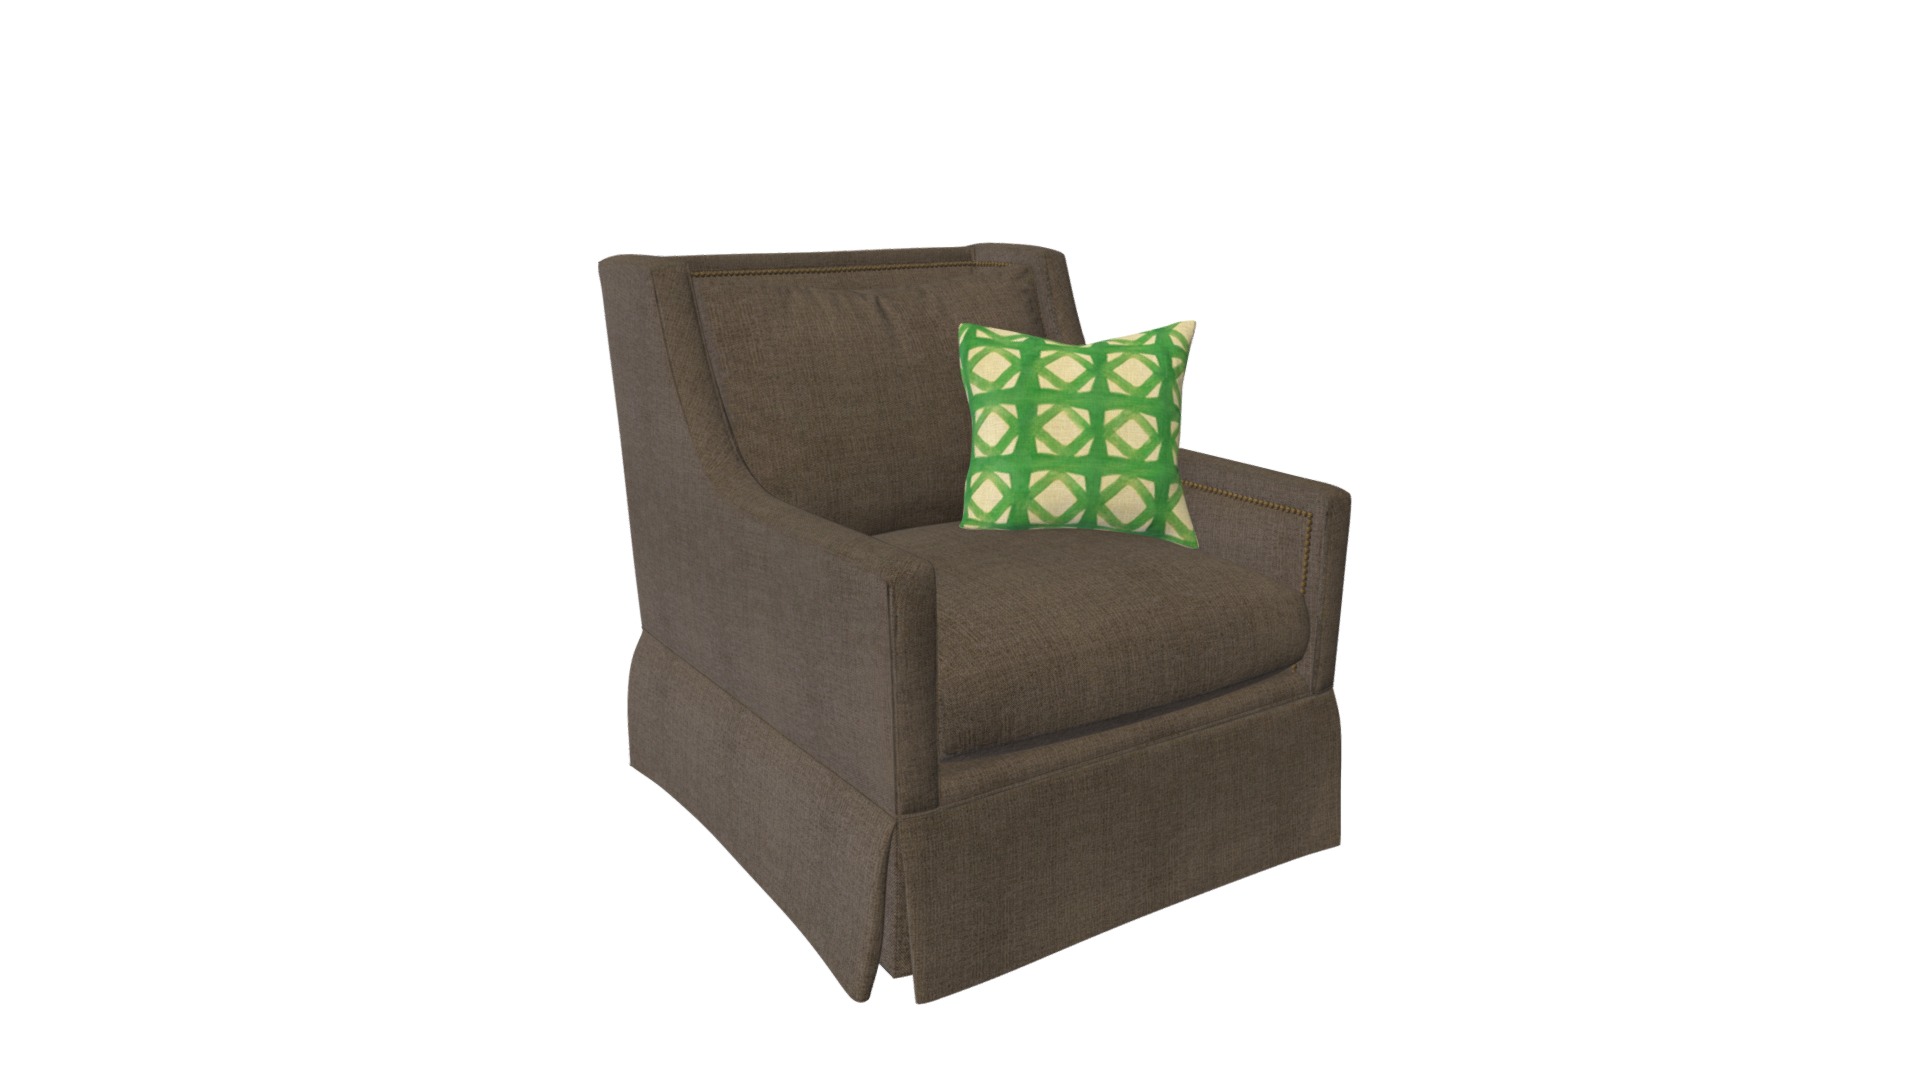 3D model Swivel Arm Chair - This is a 3D model of the Swivel Arm Chair. The 3D model is about a brown rectangle with green squares on it.